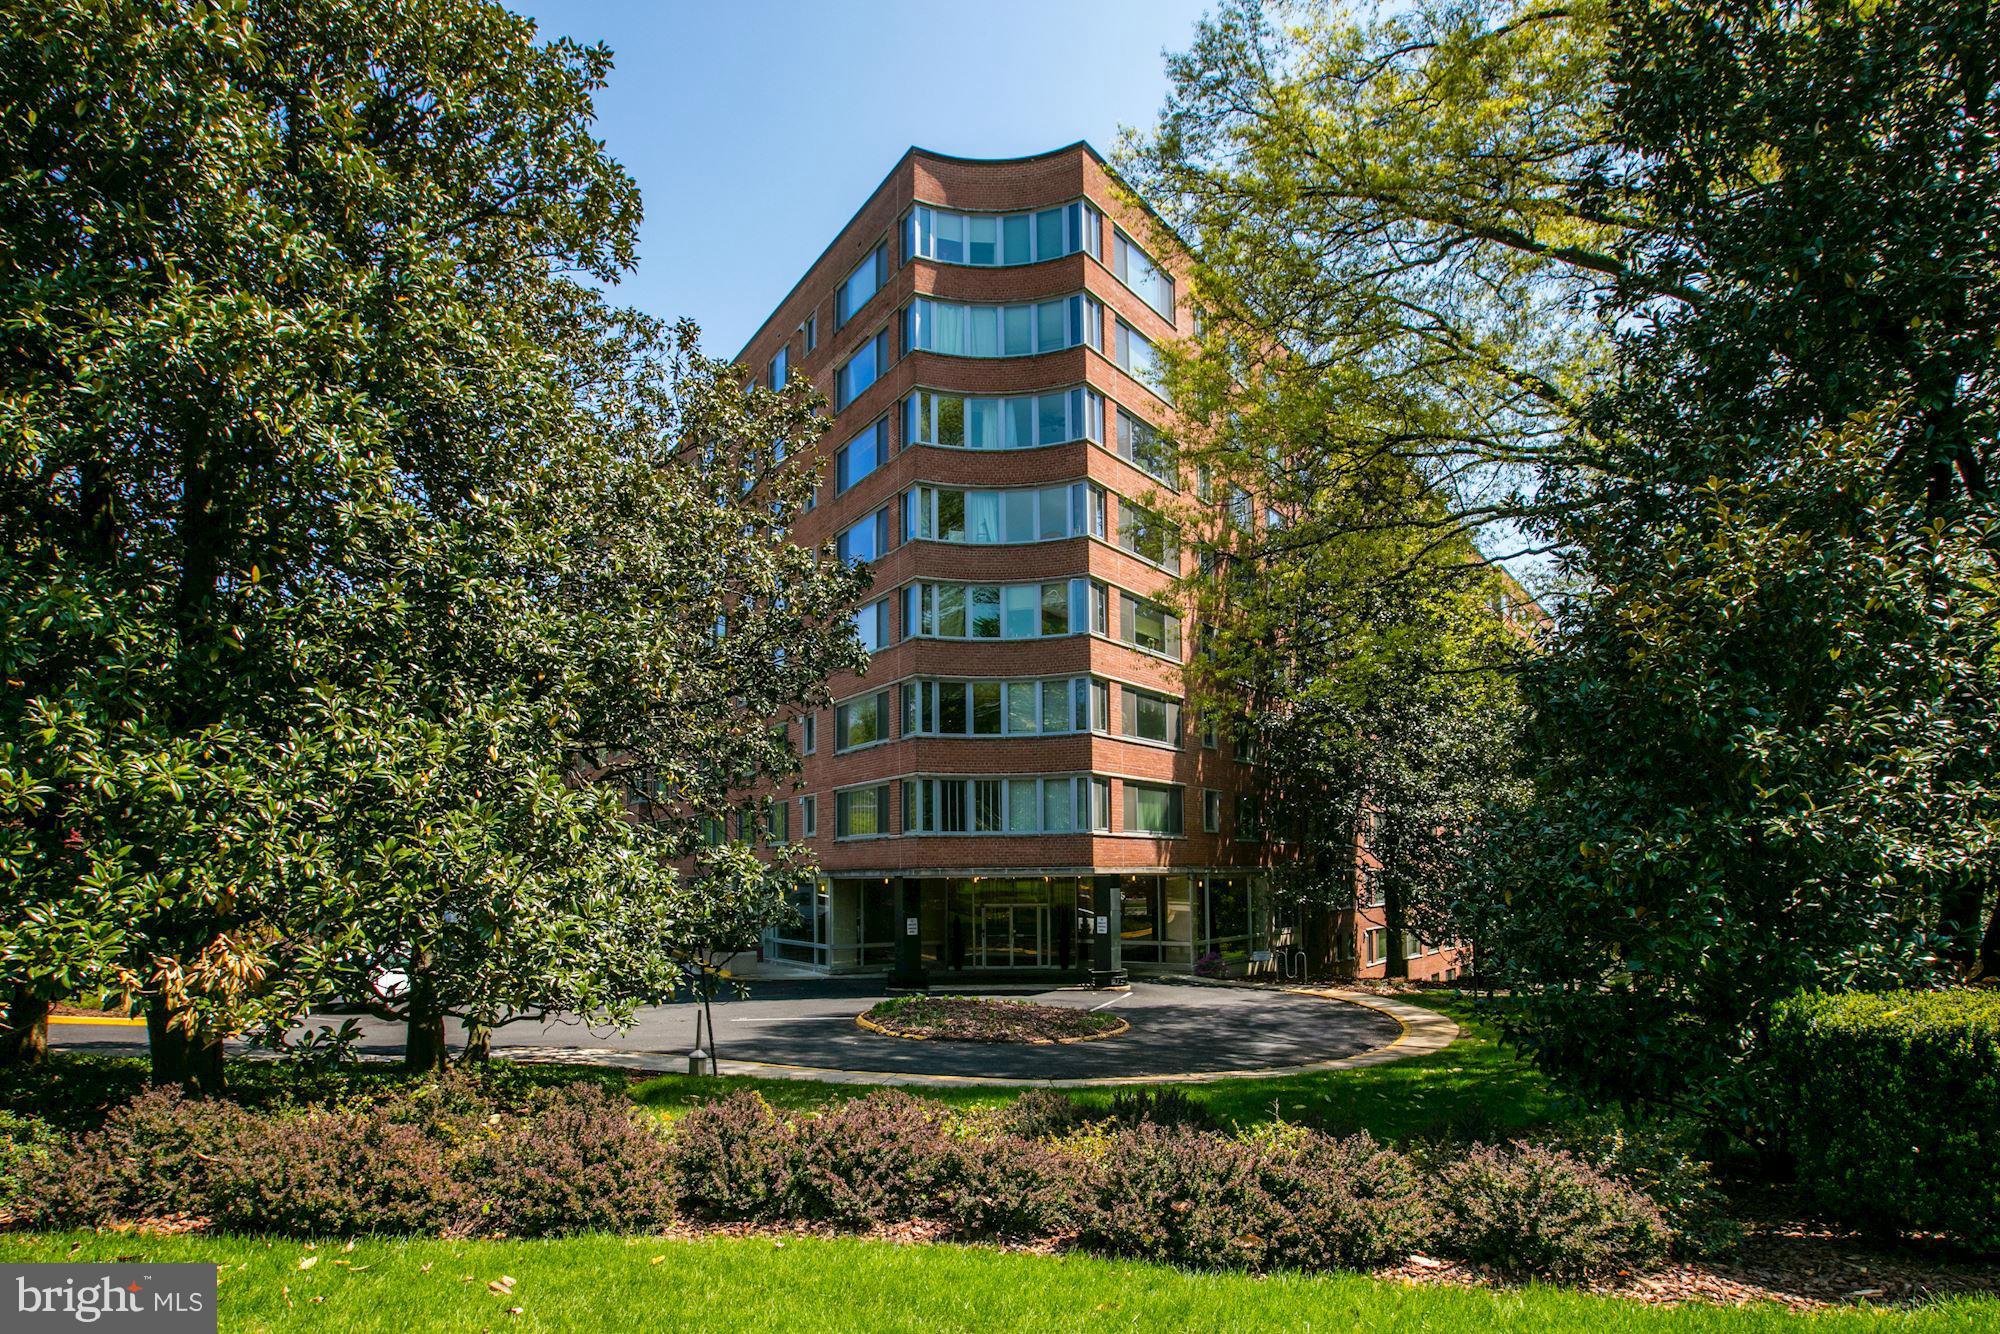 a front view of multi story residential apartment building with yard and green space